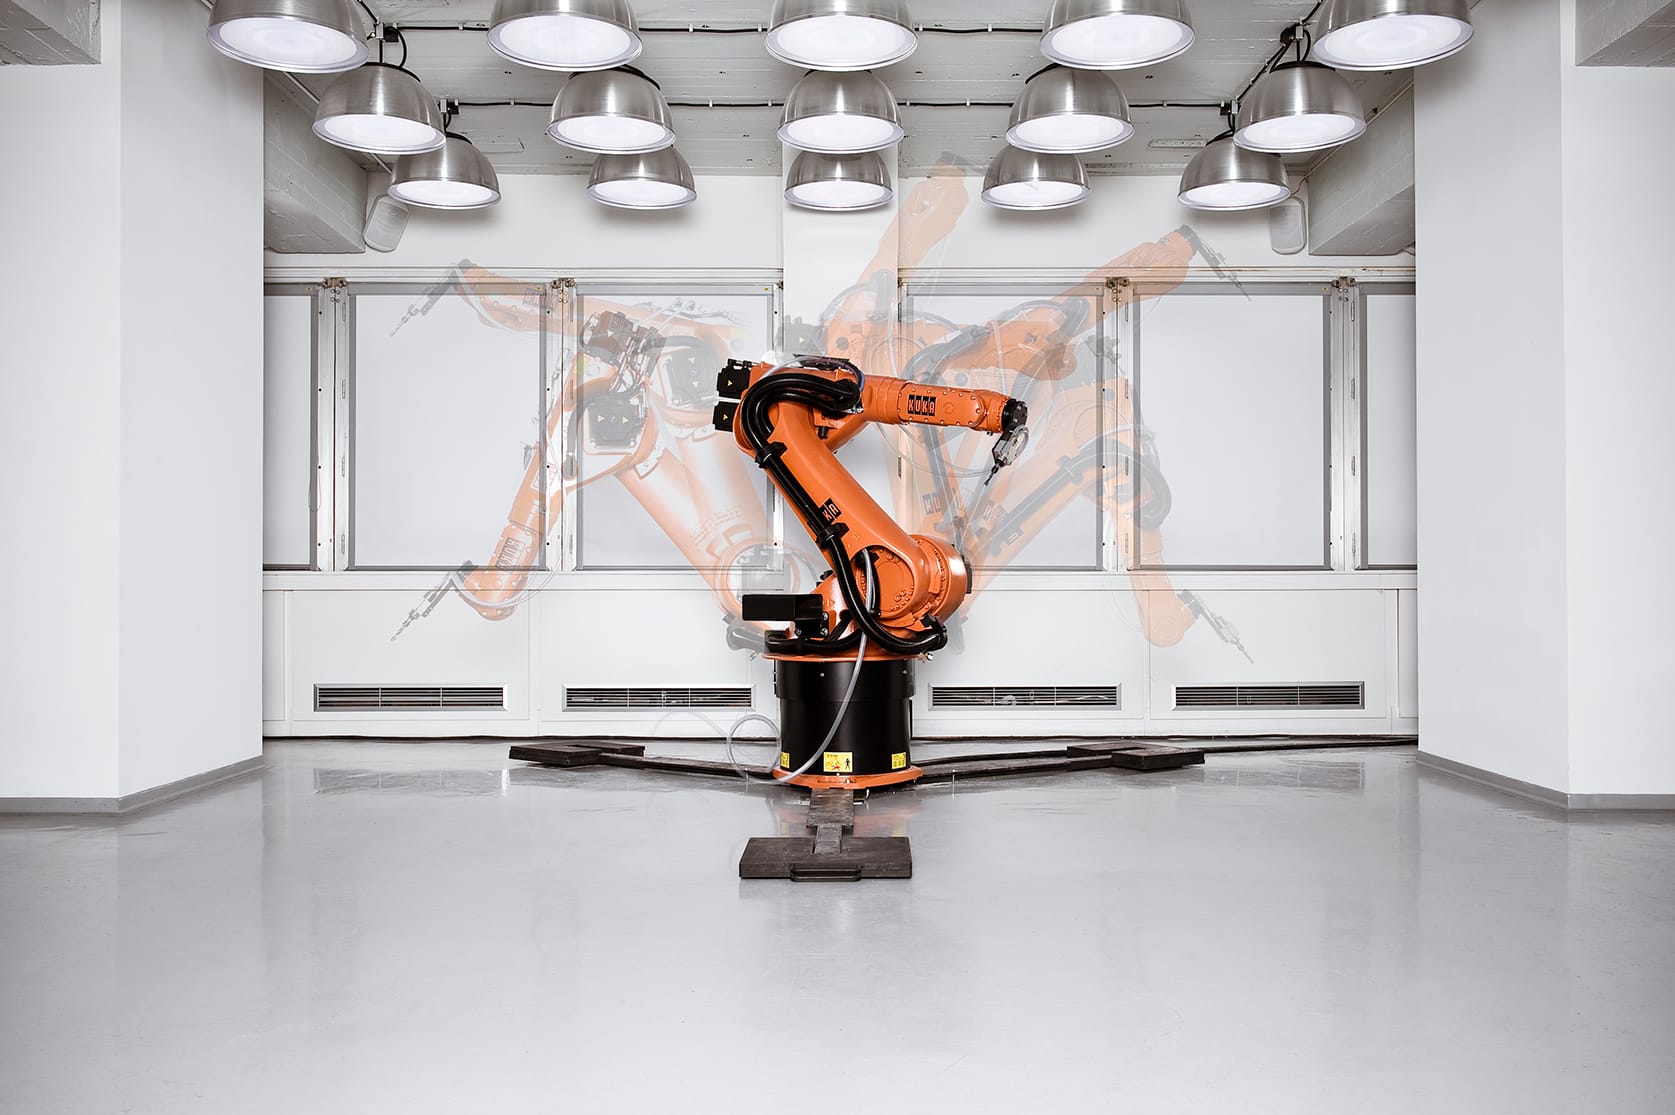 The KUKA robot, performing choreographed live manufacturing